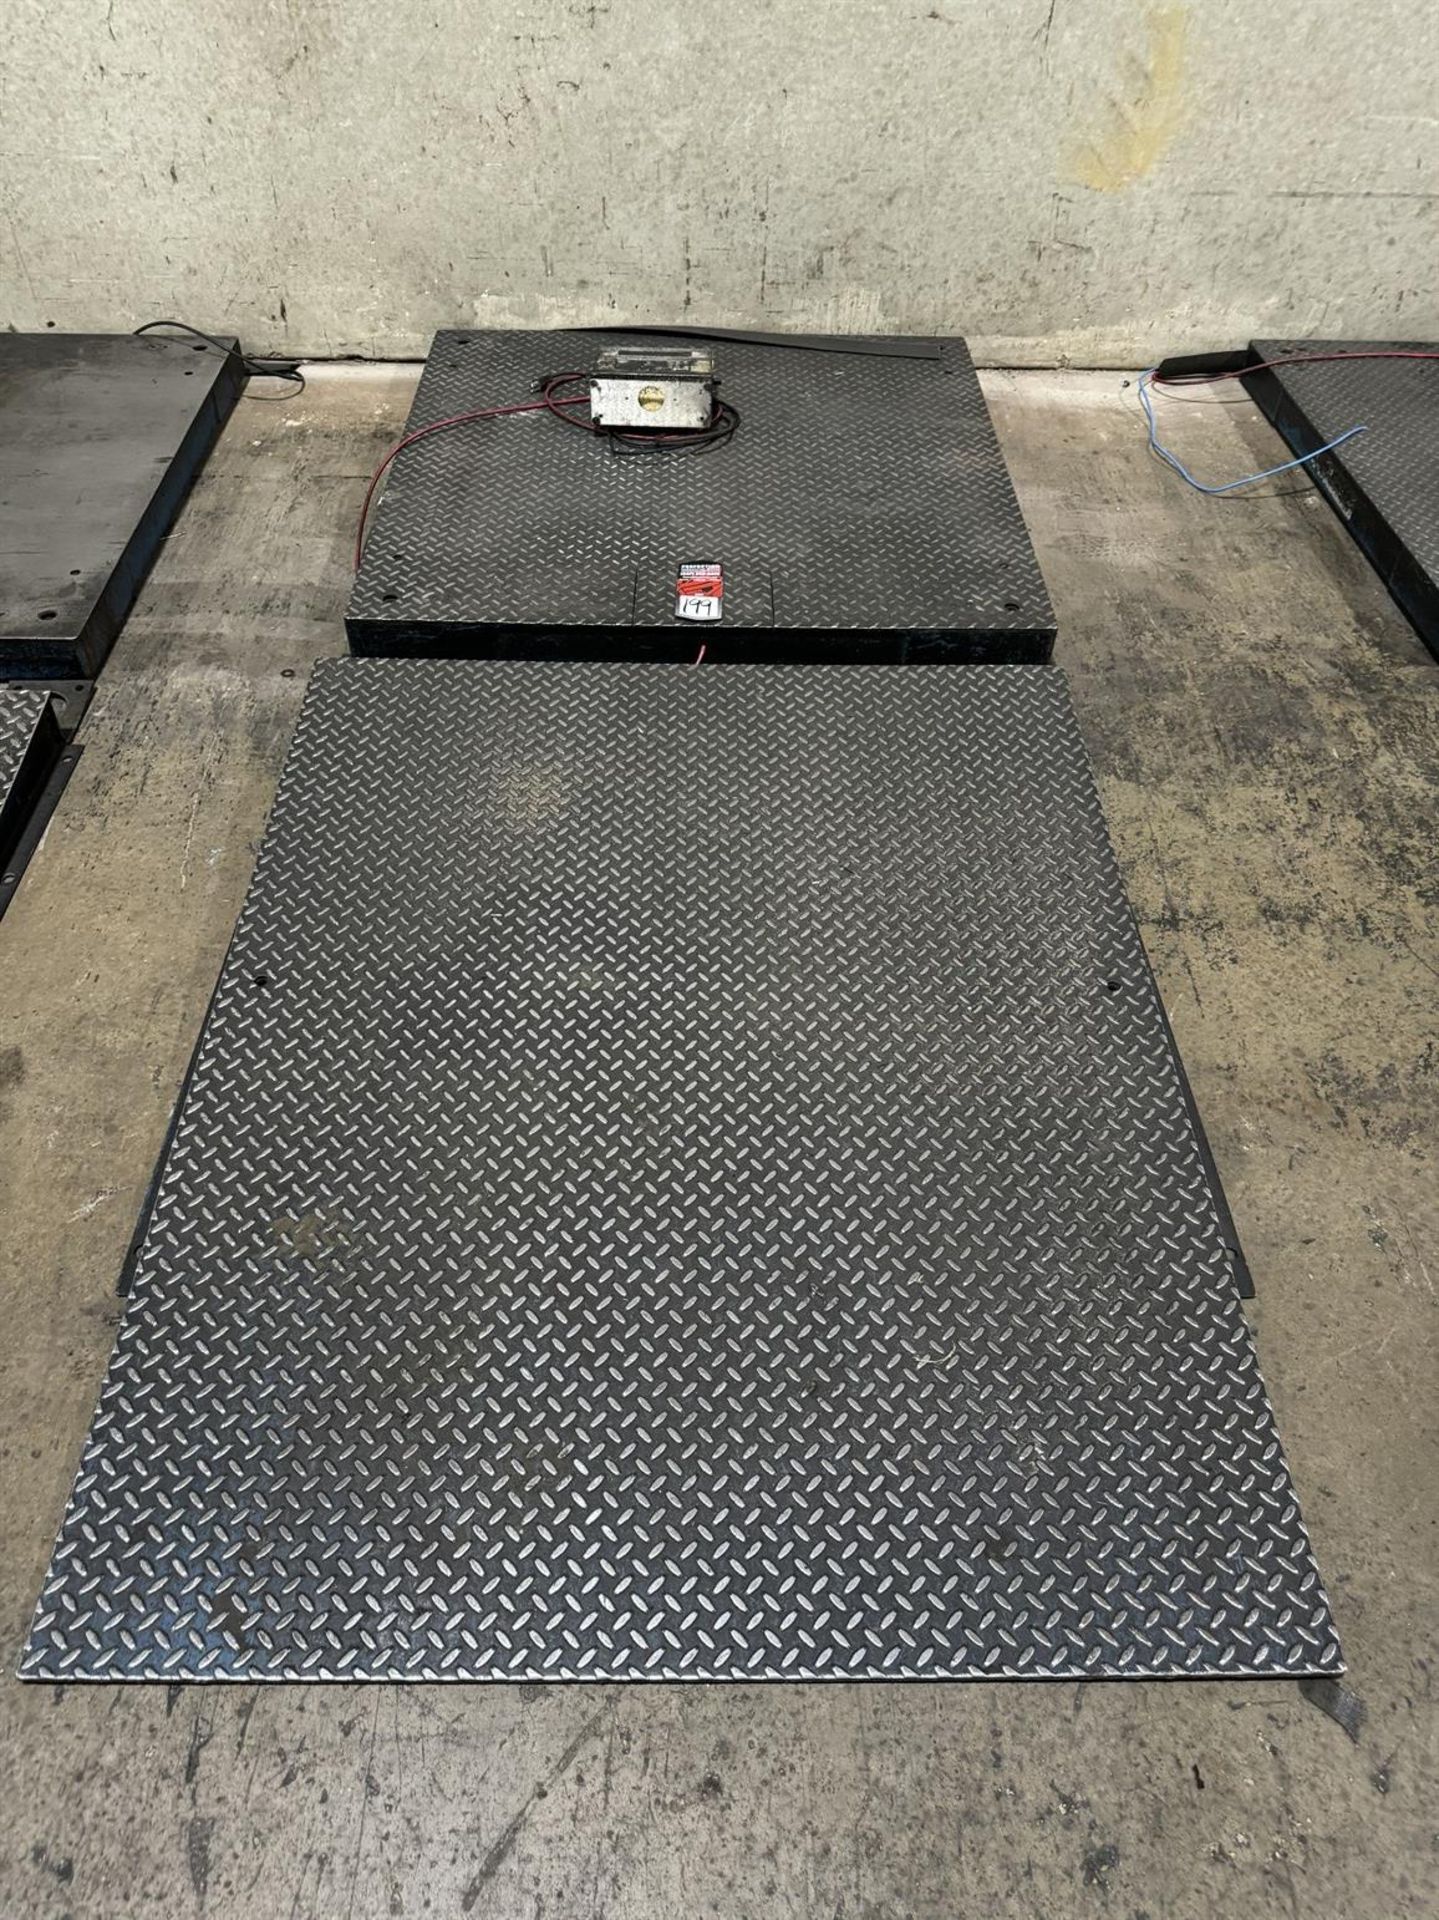 GSE 4' x 4' Floor Scale w/ Ramp and GSE 4600 Digital Scale, 5000 Lb. Capacity - Image 2 of 4